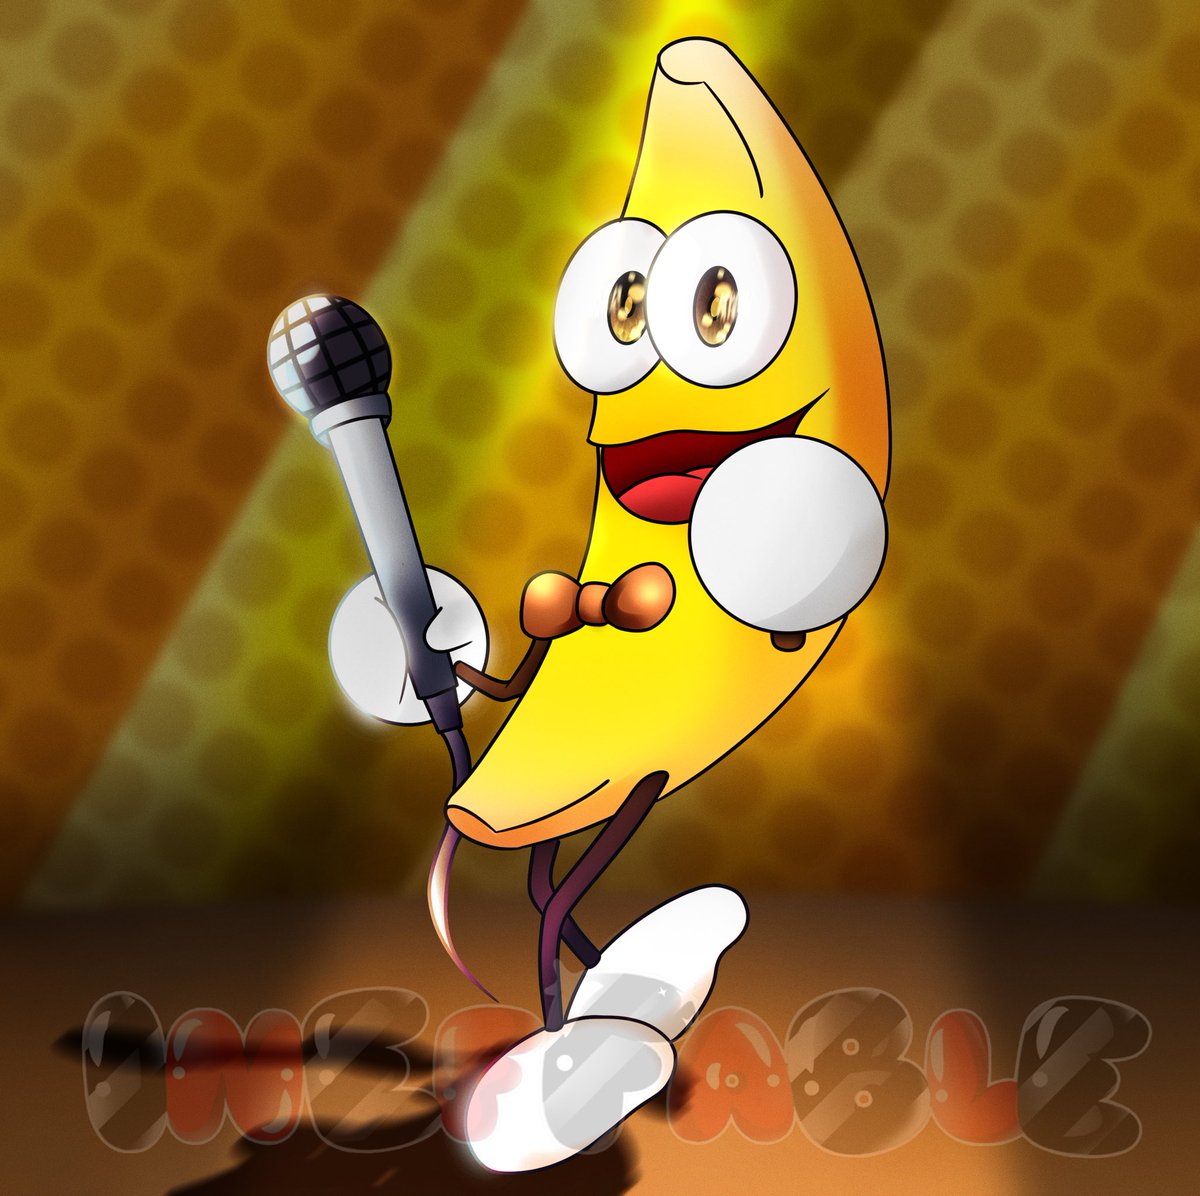 It’s the dancing banana!! A quick drawing I made while I was bored. What do you think? :’)